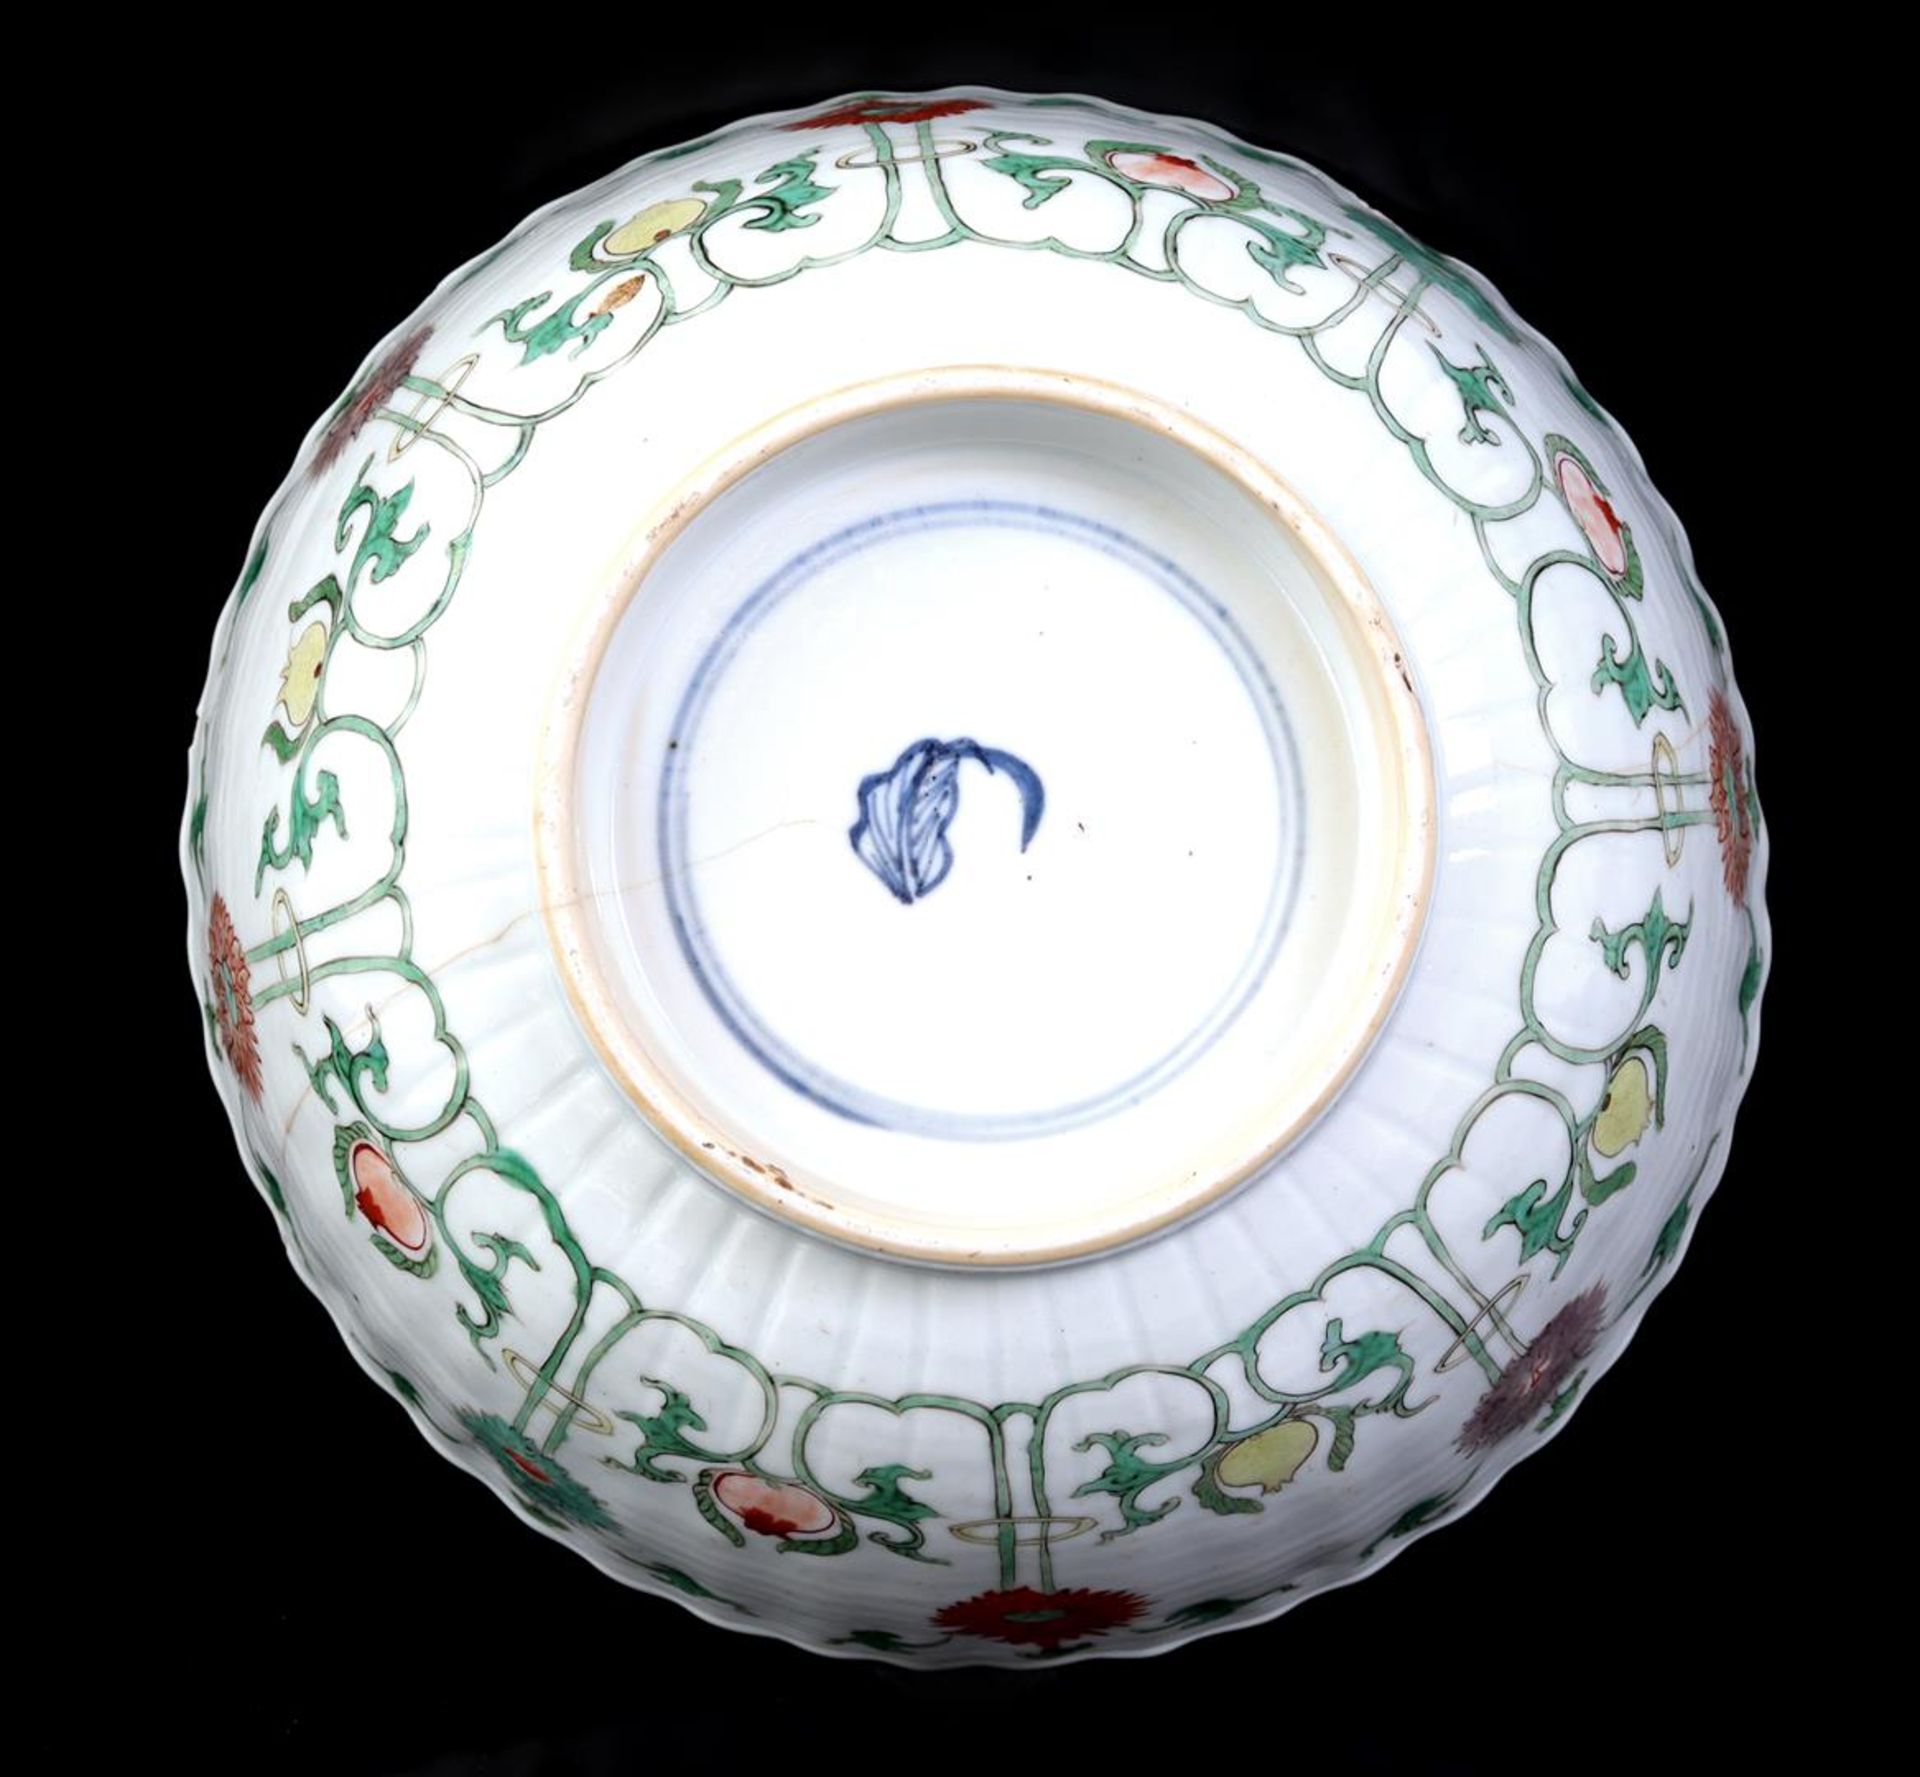 2 Chinese Famille vert porcelain bowls, 18th century, 9 cm high, approx. 20 cm in diameter (hairline - Image 6 of 6